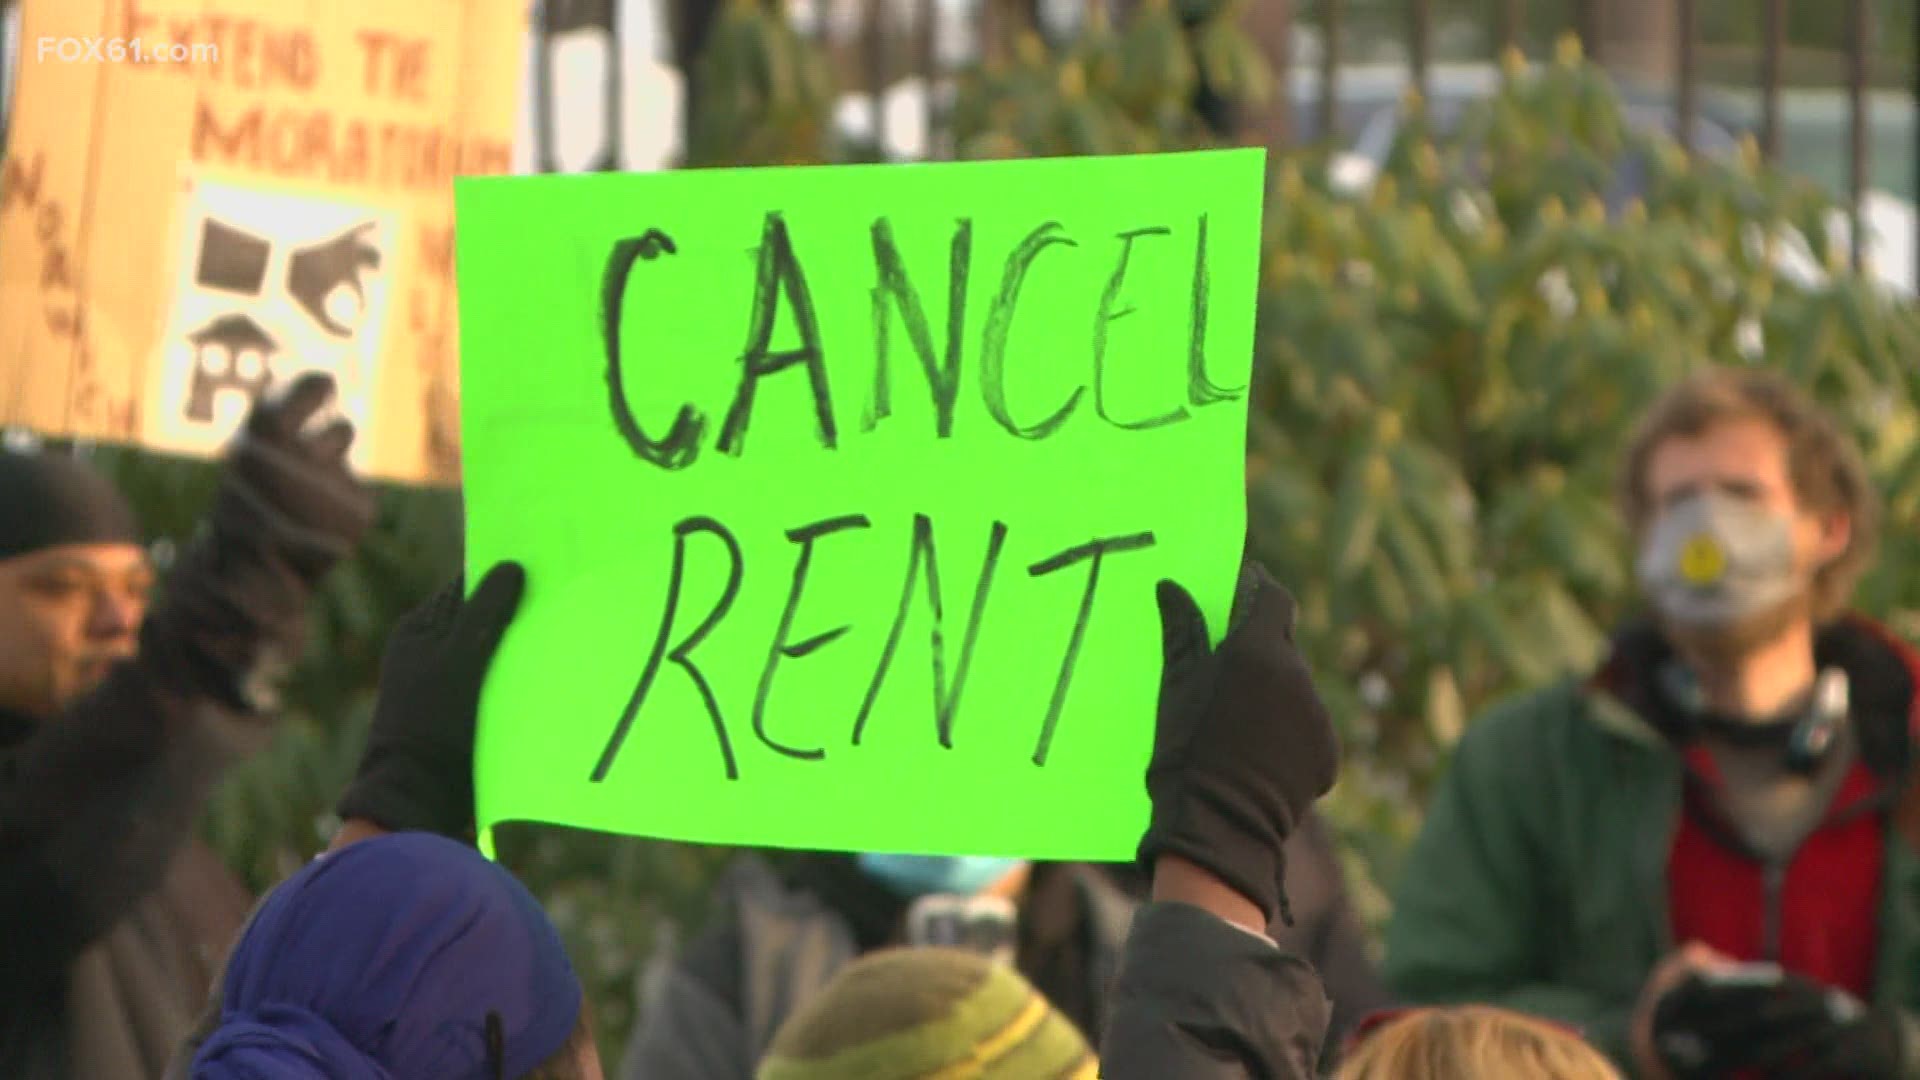 Protestors want the moratorium on evictions extended.